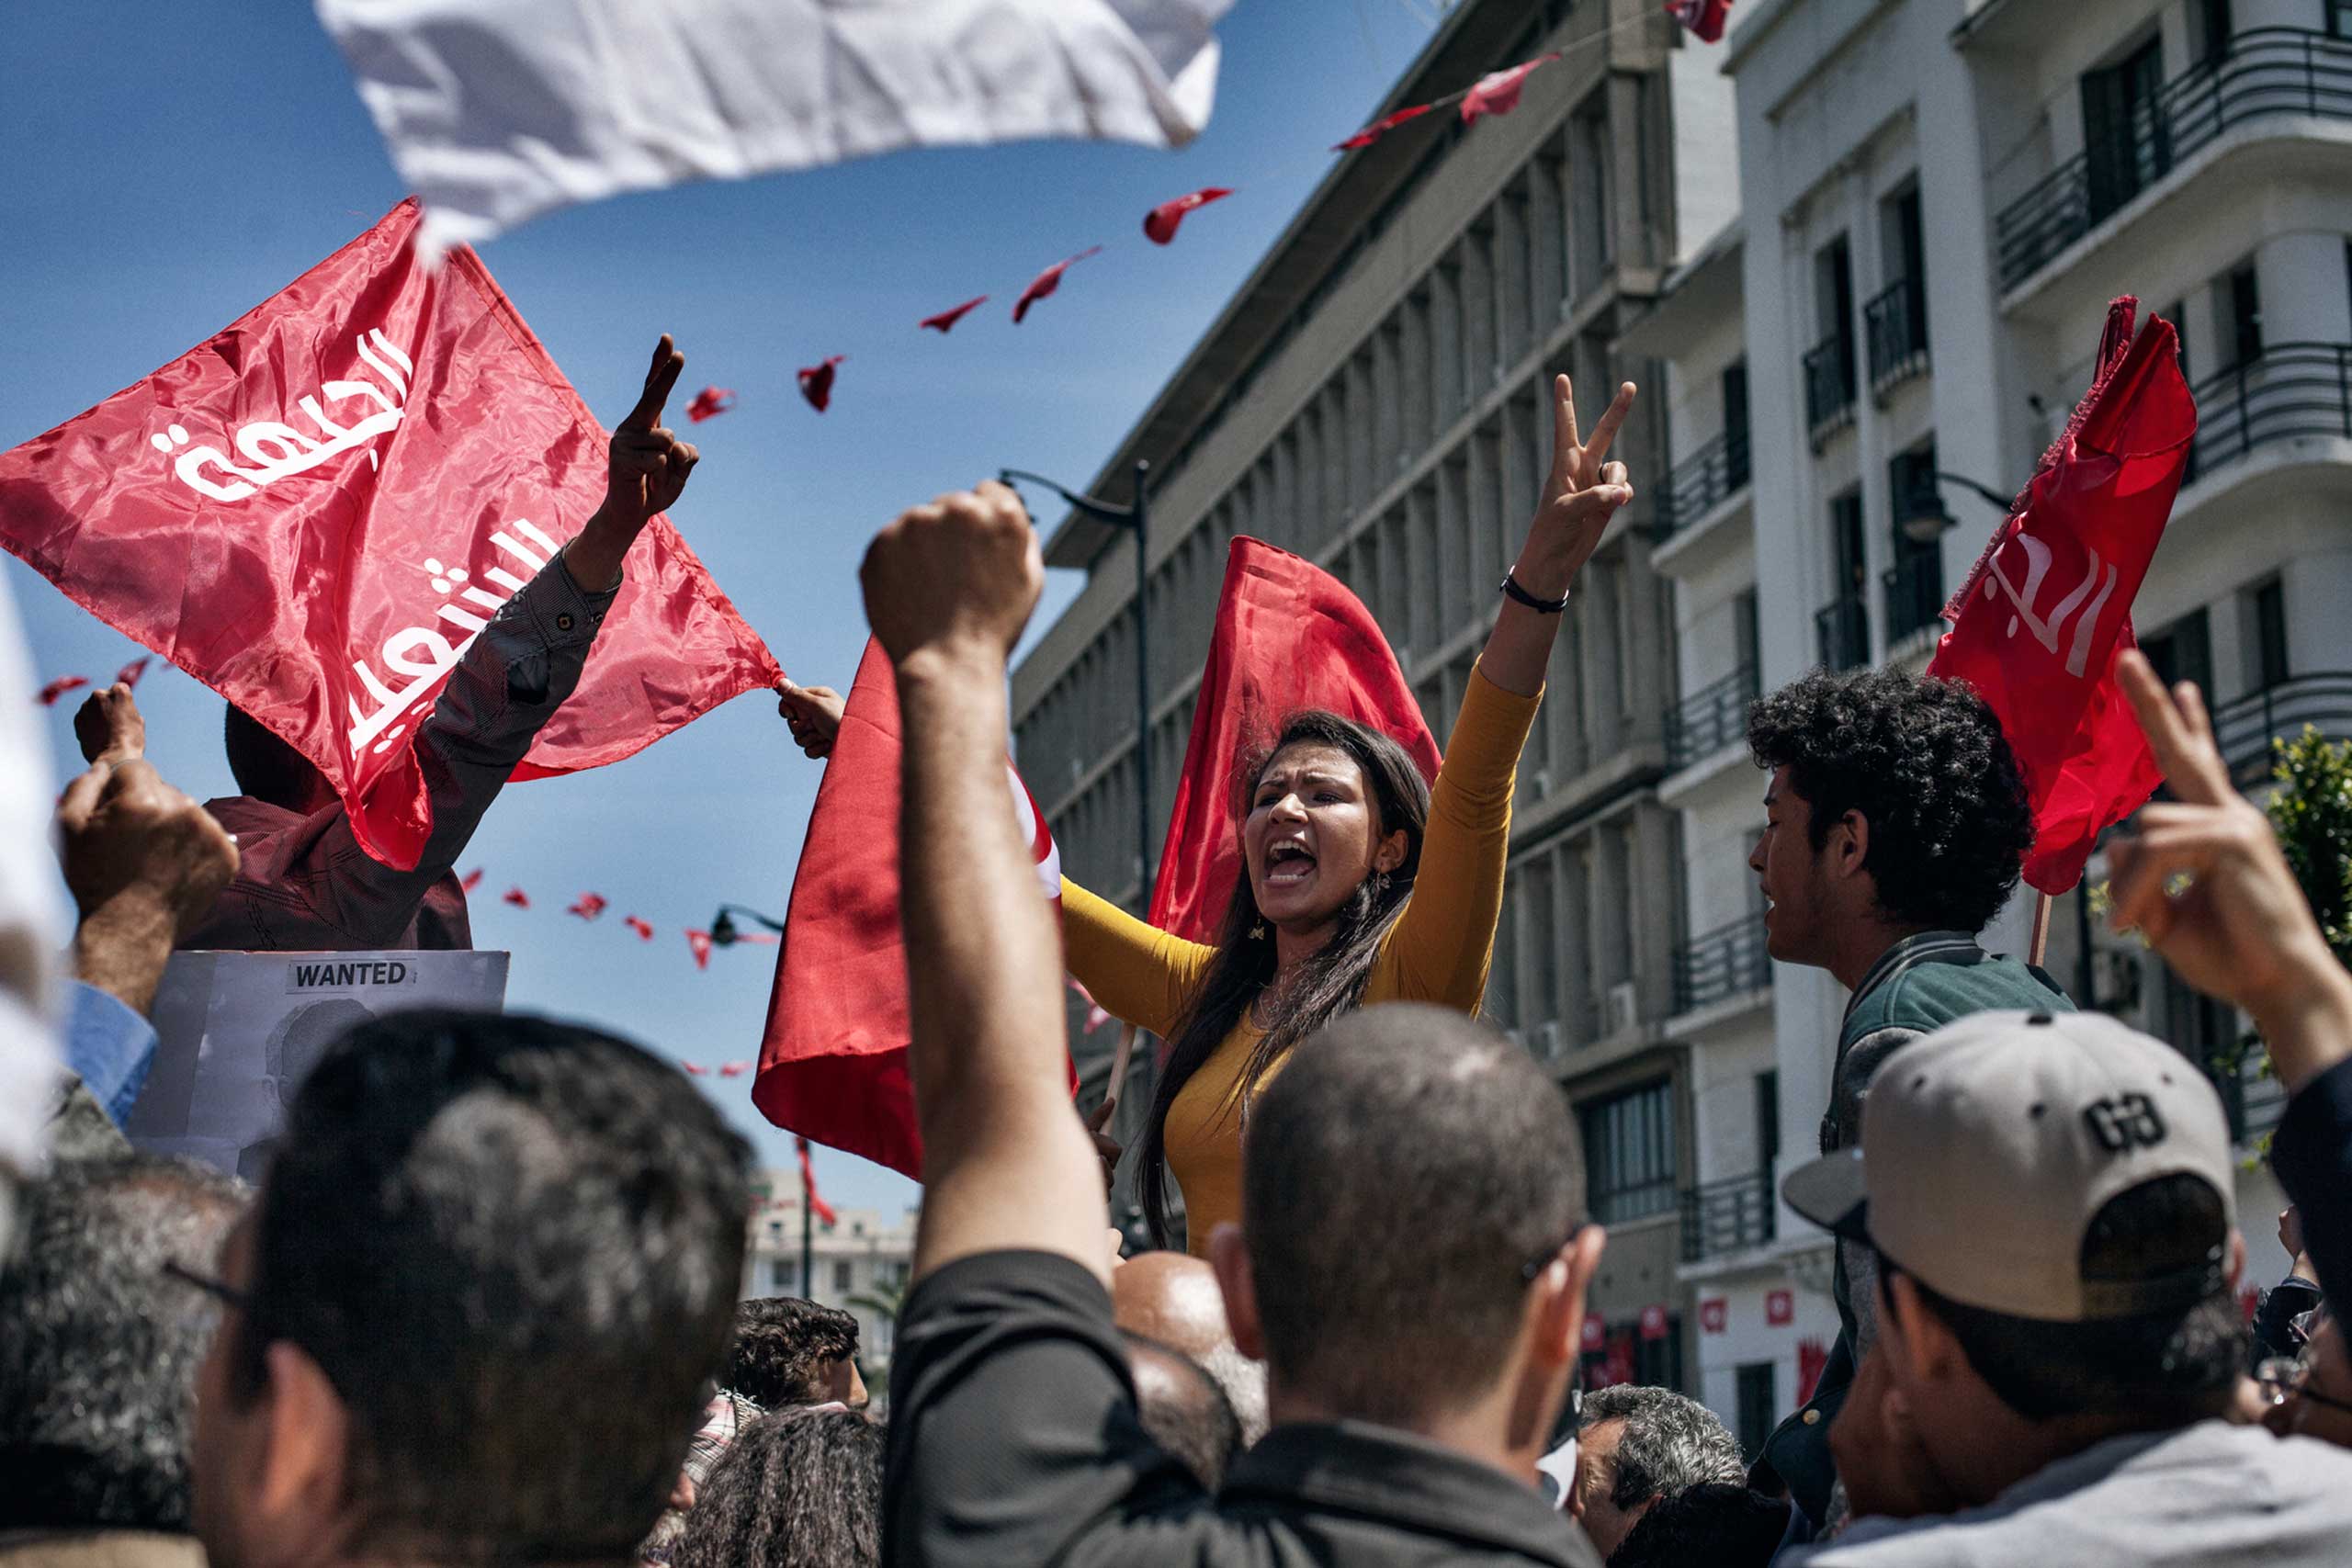 Khouloud, an engineering student, shouts slogans May 2013, during the weekly demonstration in front of the Ministry of Interior asking for progress in the investigation of the assassination of Chokri Belaid. opposition leader Chokri Belaid, was killed by a gunman in Feb. 2013. (Laura Boushnak)